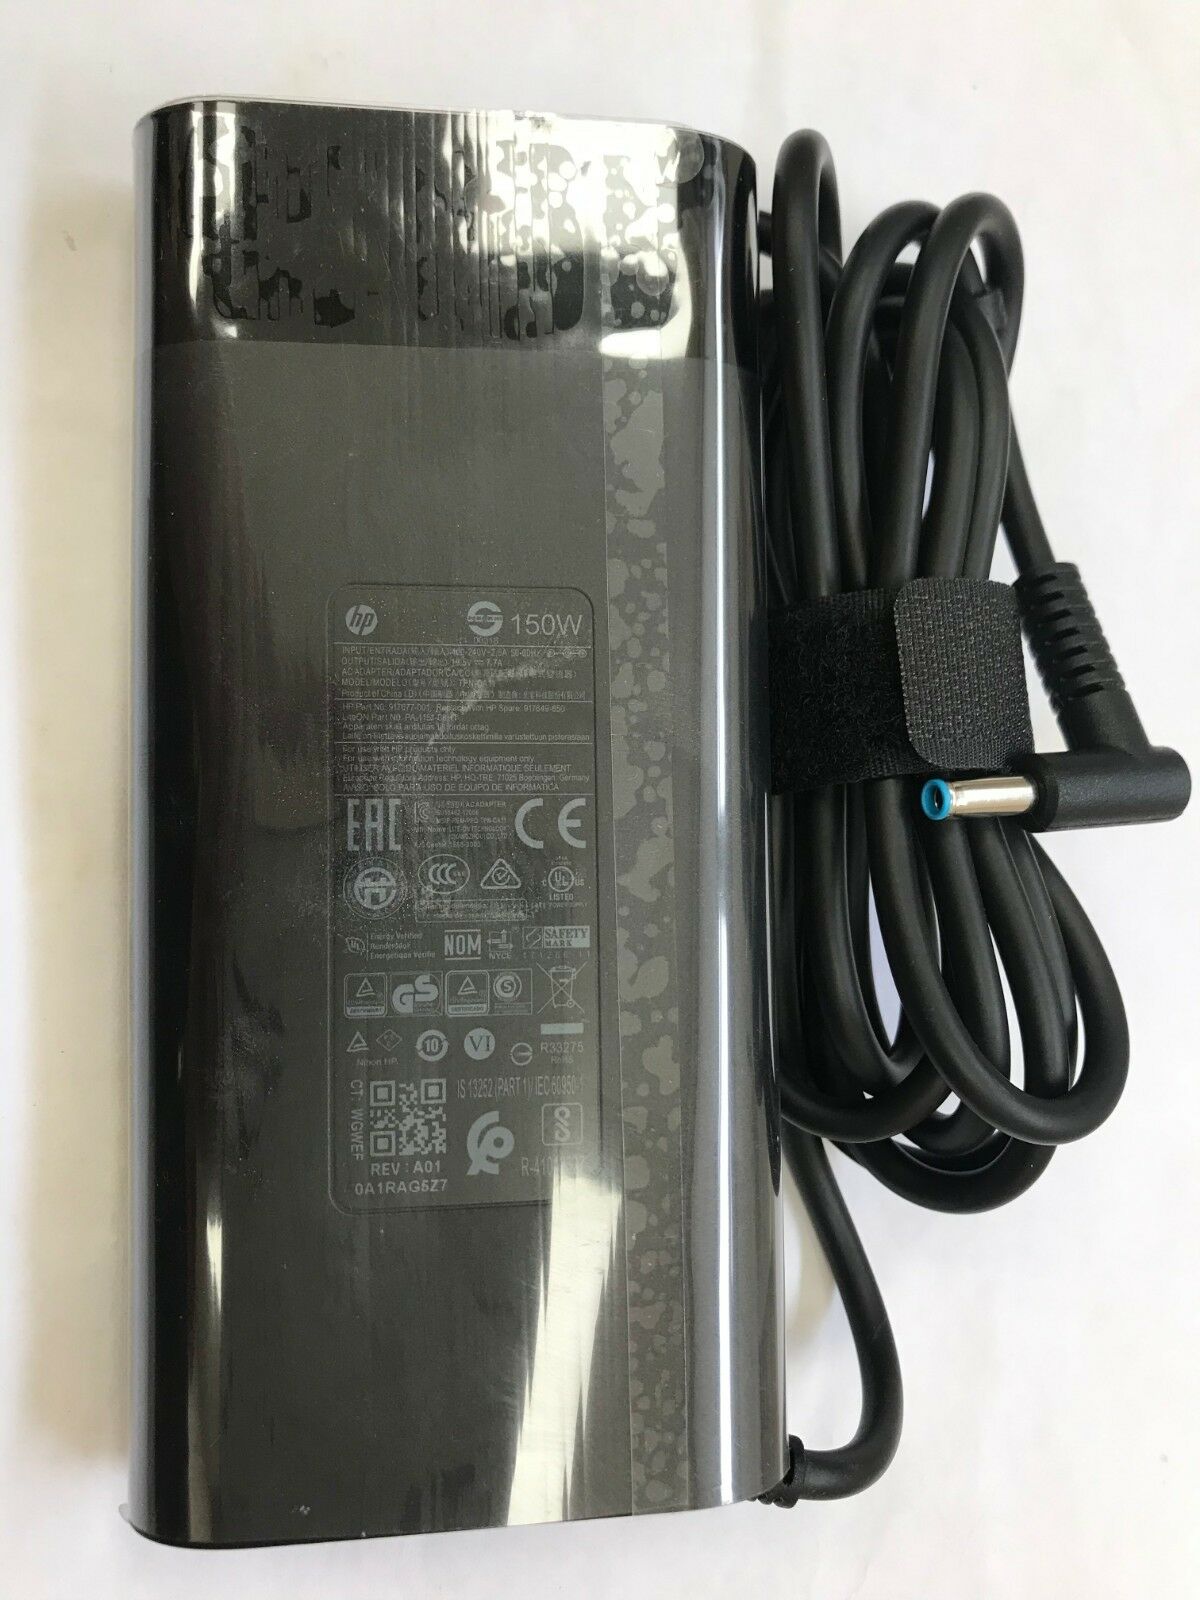 New Original HP 150W TPN-CA11(917677-001) AC Adapter for TPN-DA09/03 +powercord Compatible Brand: For HP Type: AC/